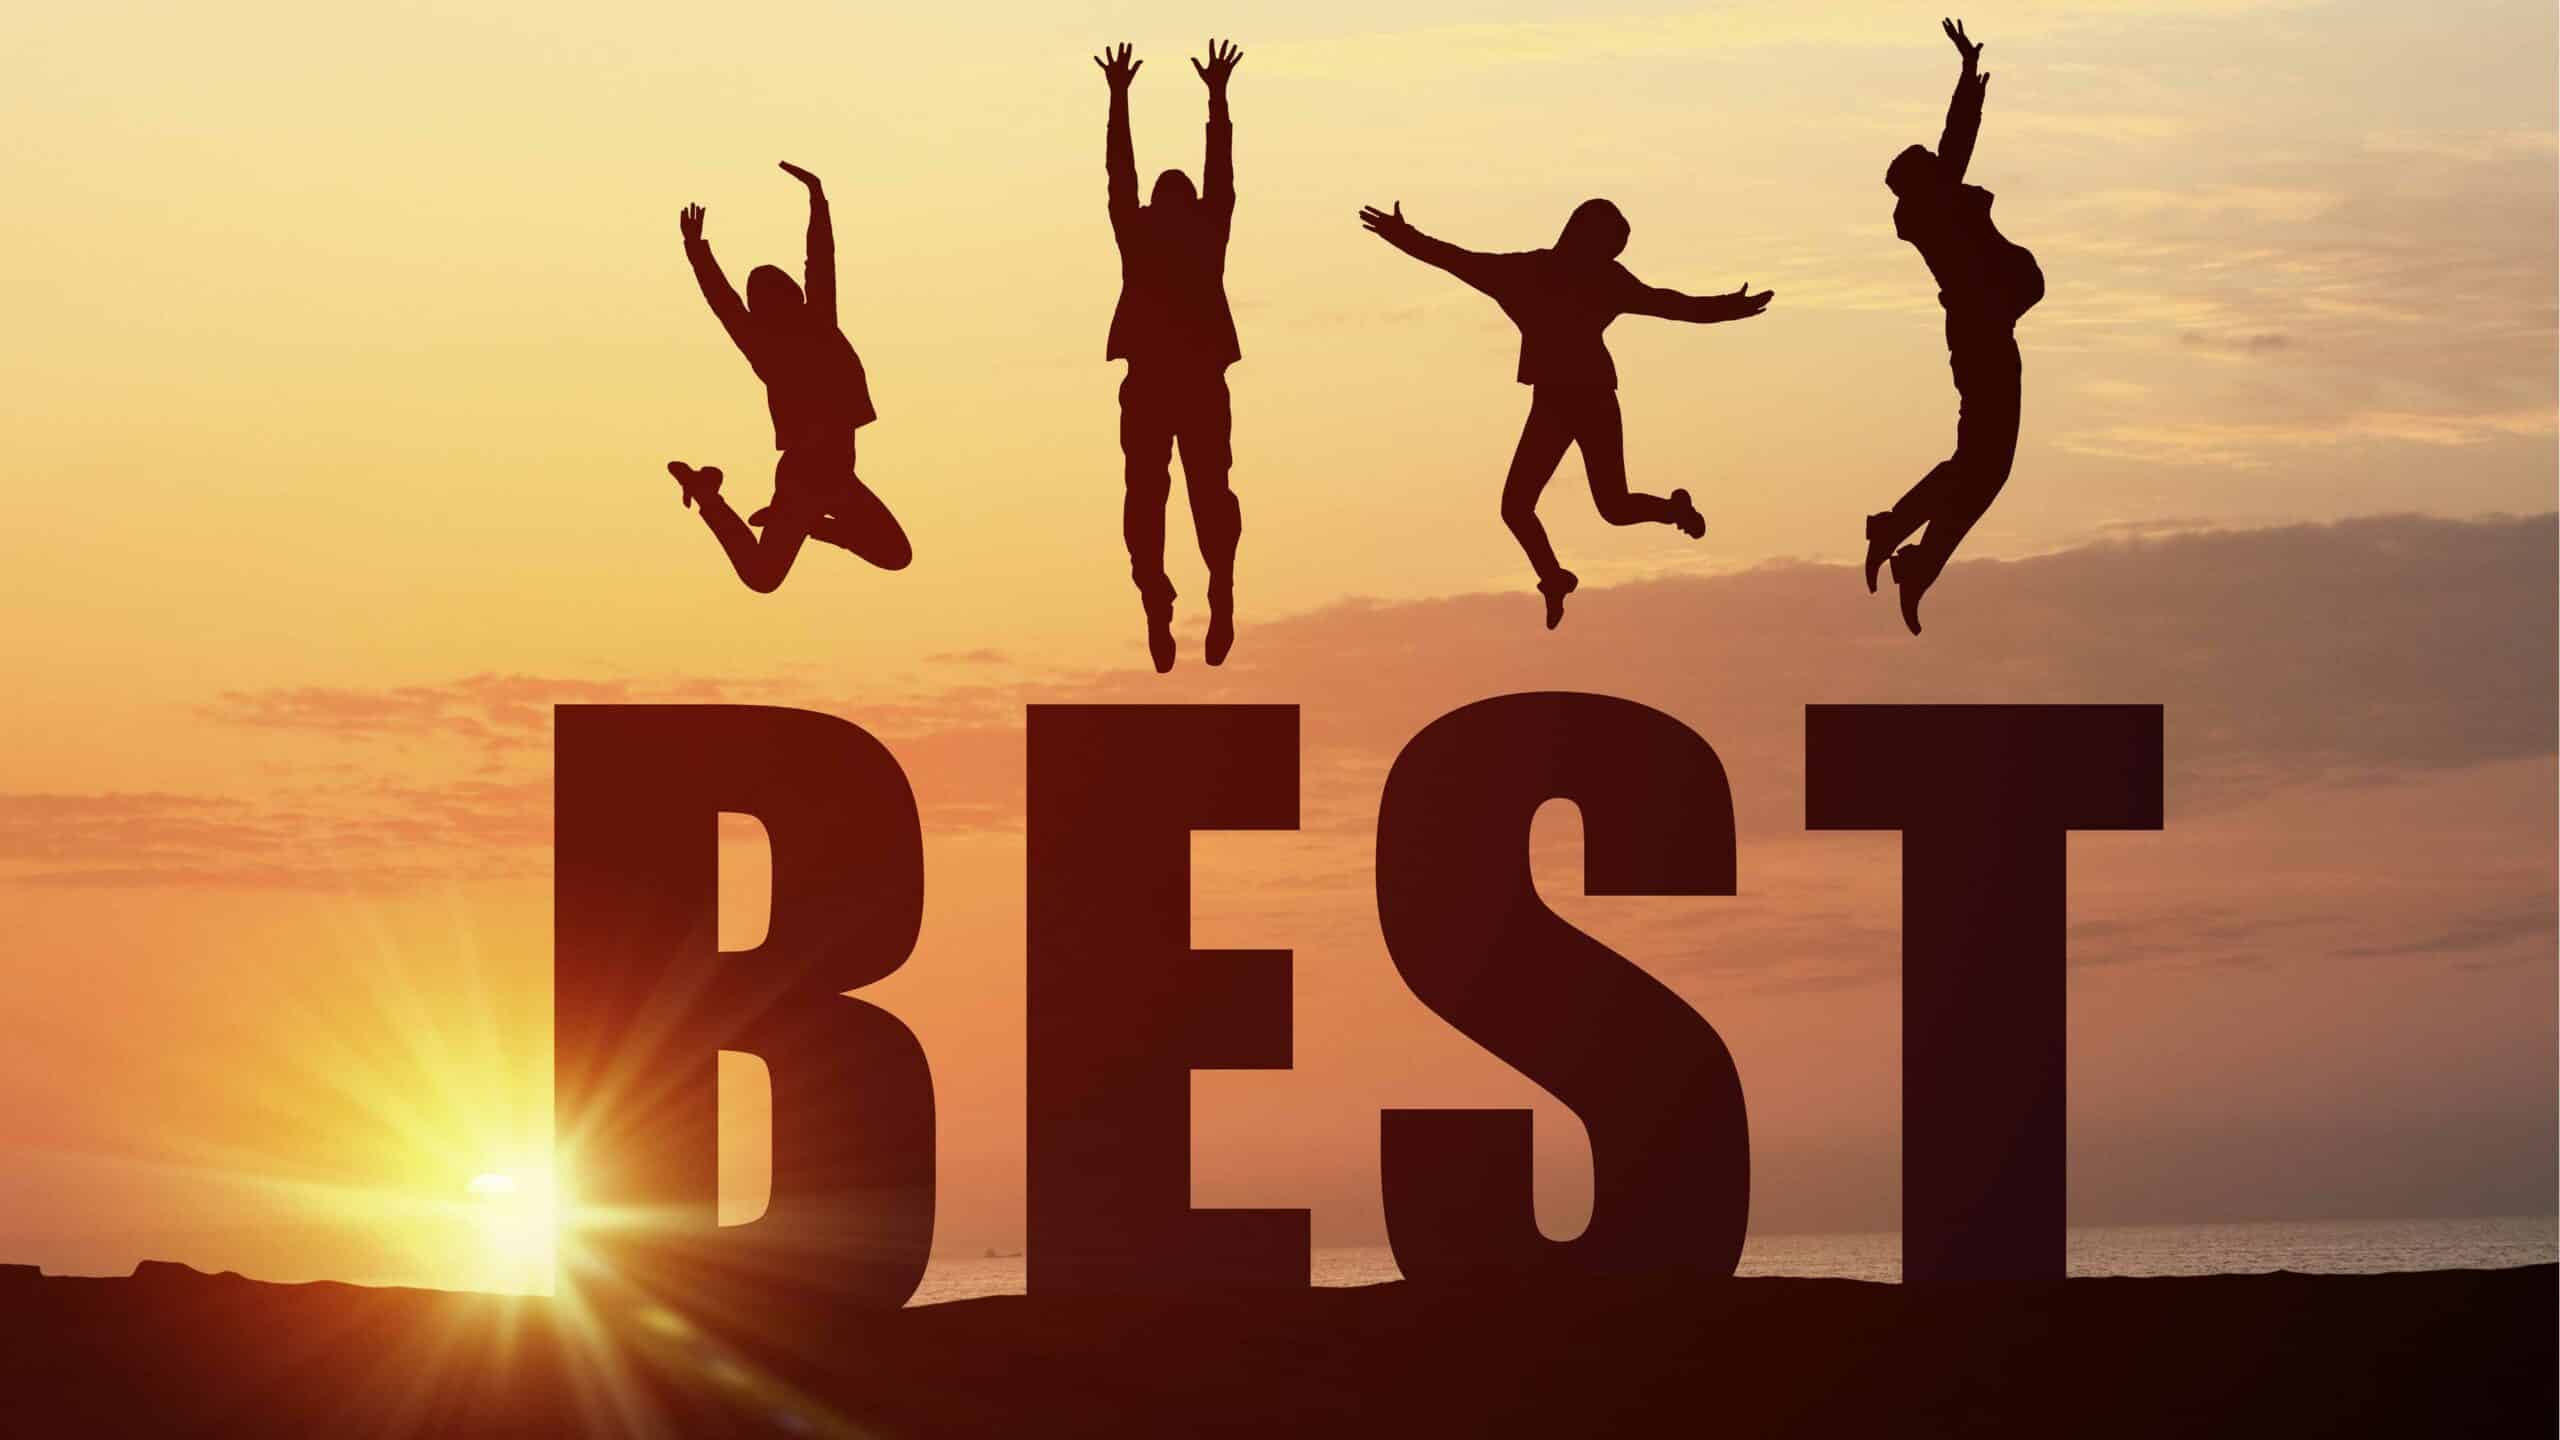 The best in the world take. The best картинки. The best надпись. Надпись best of the best. Best логотип.